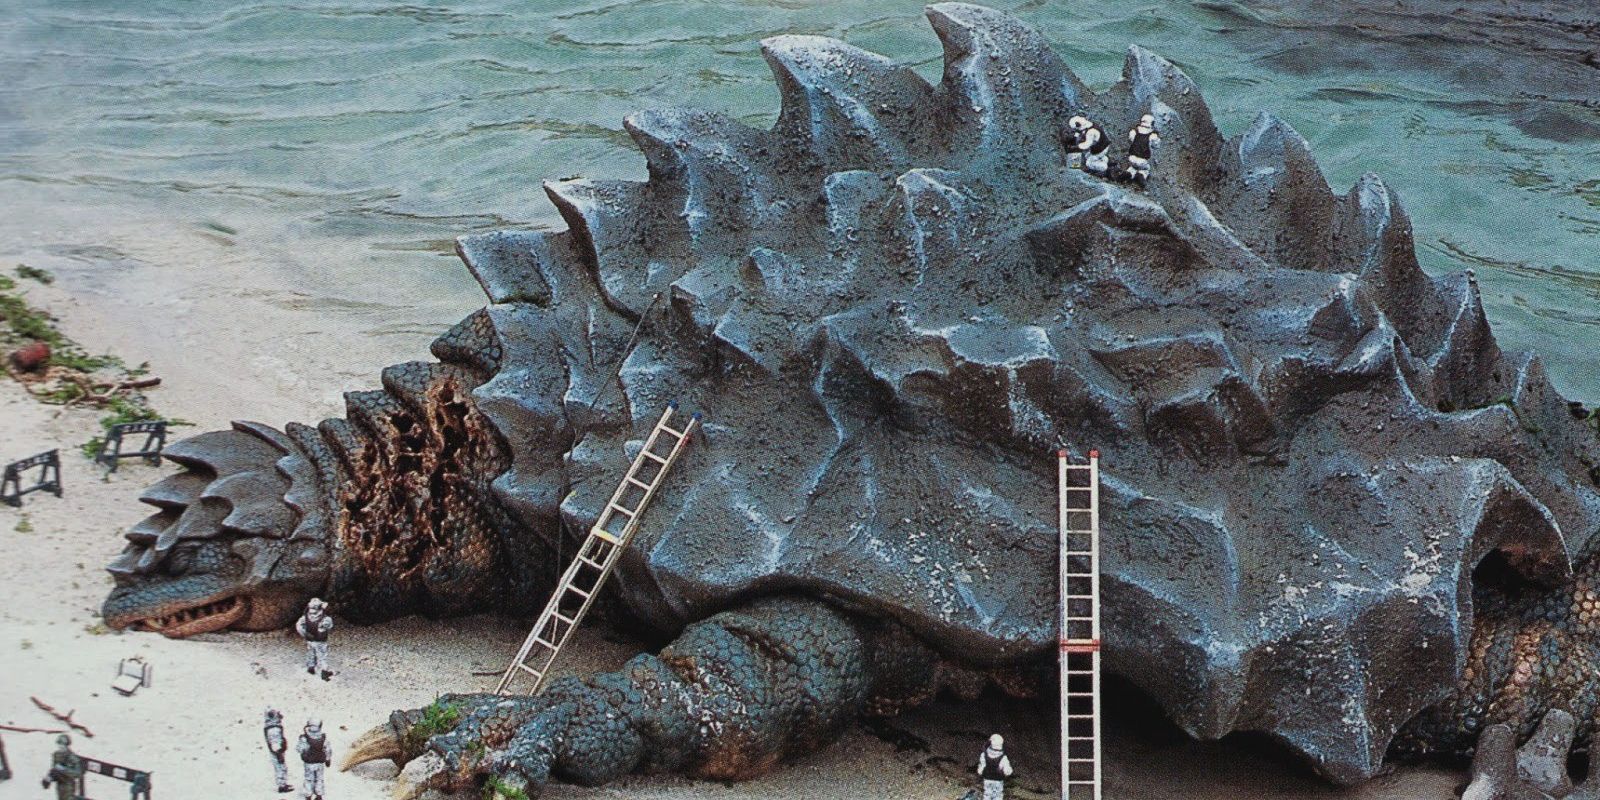 Godzilla Monster Enemies Ranked from Worst to Best | 15 Minute News